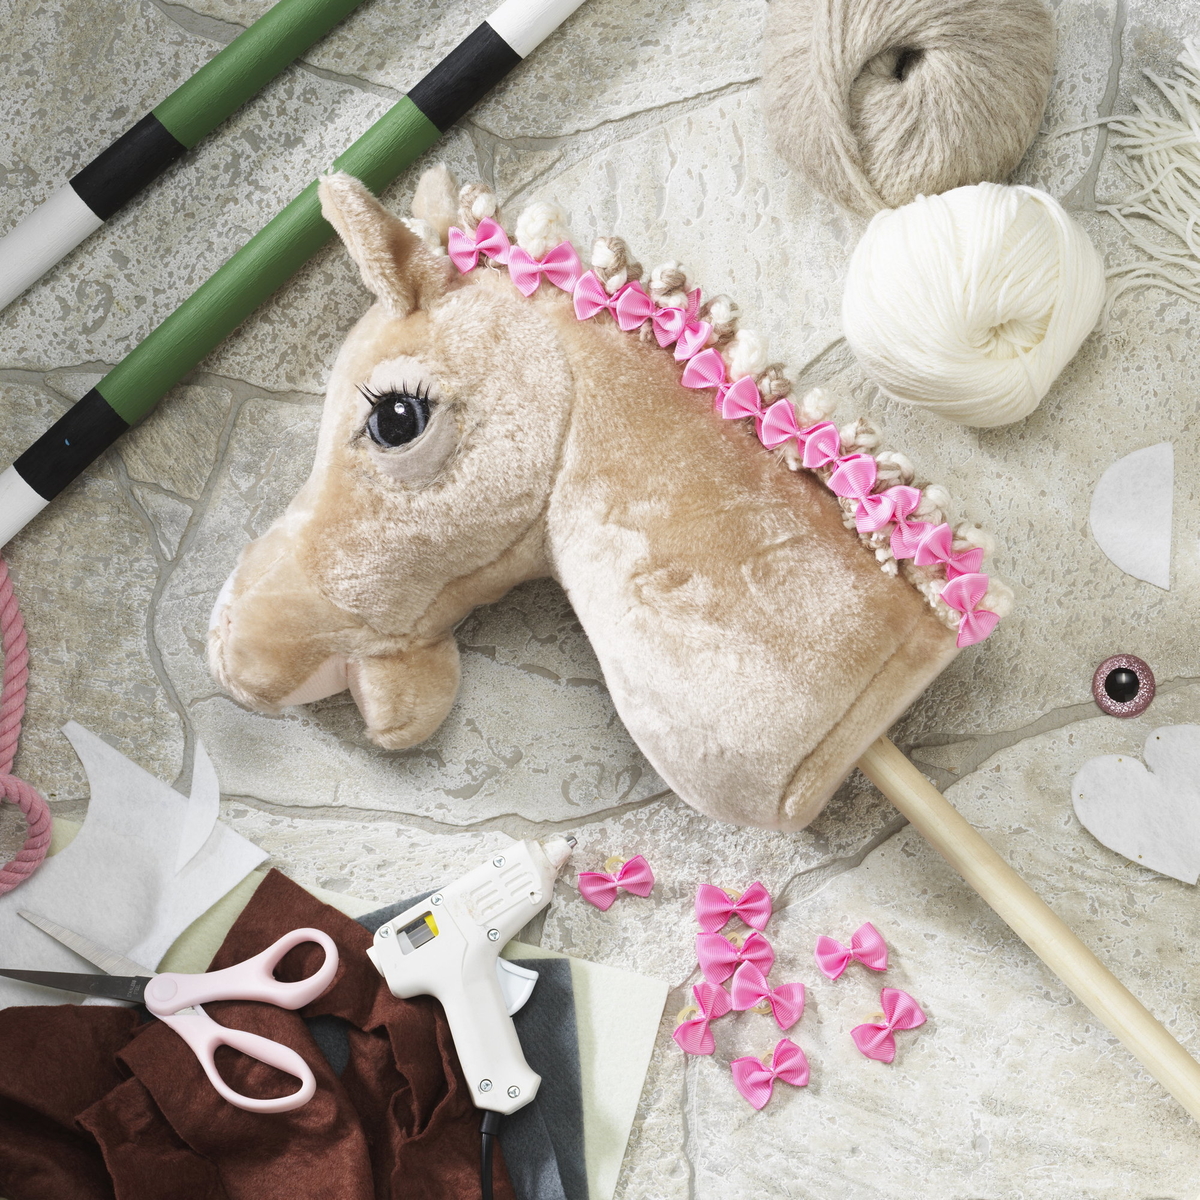 Get your hobby horse ready for competition